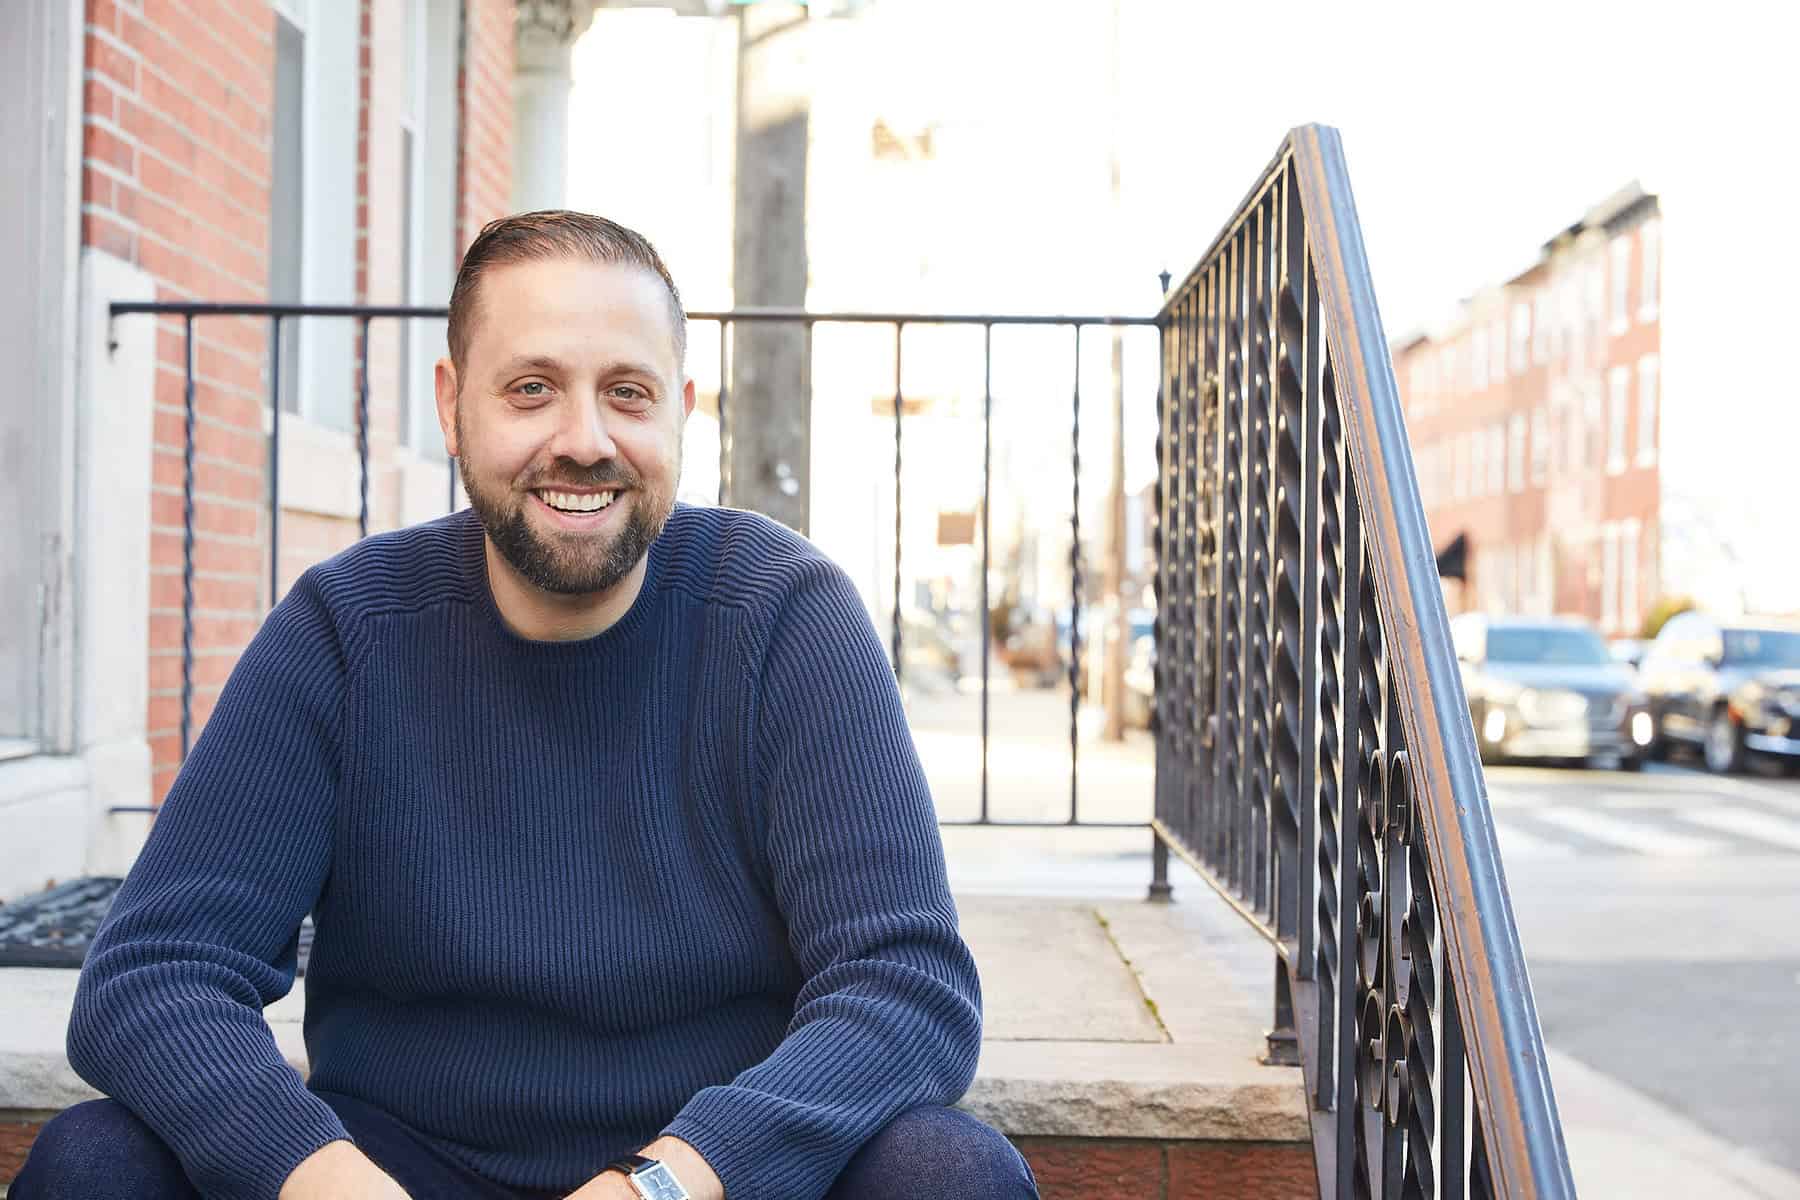 Point Breeze’s Itzkowitz running for Council at large